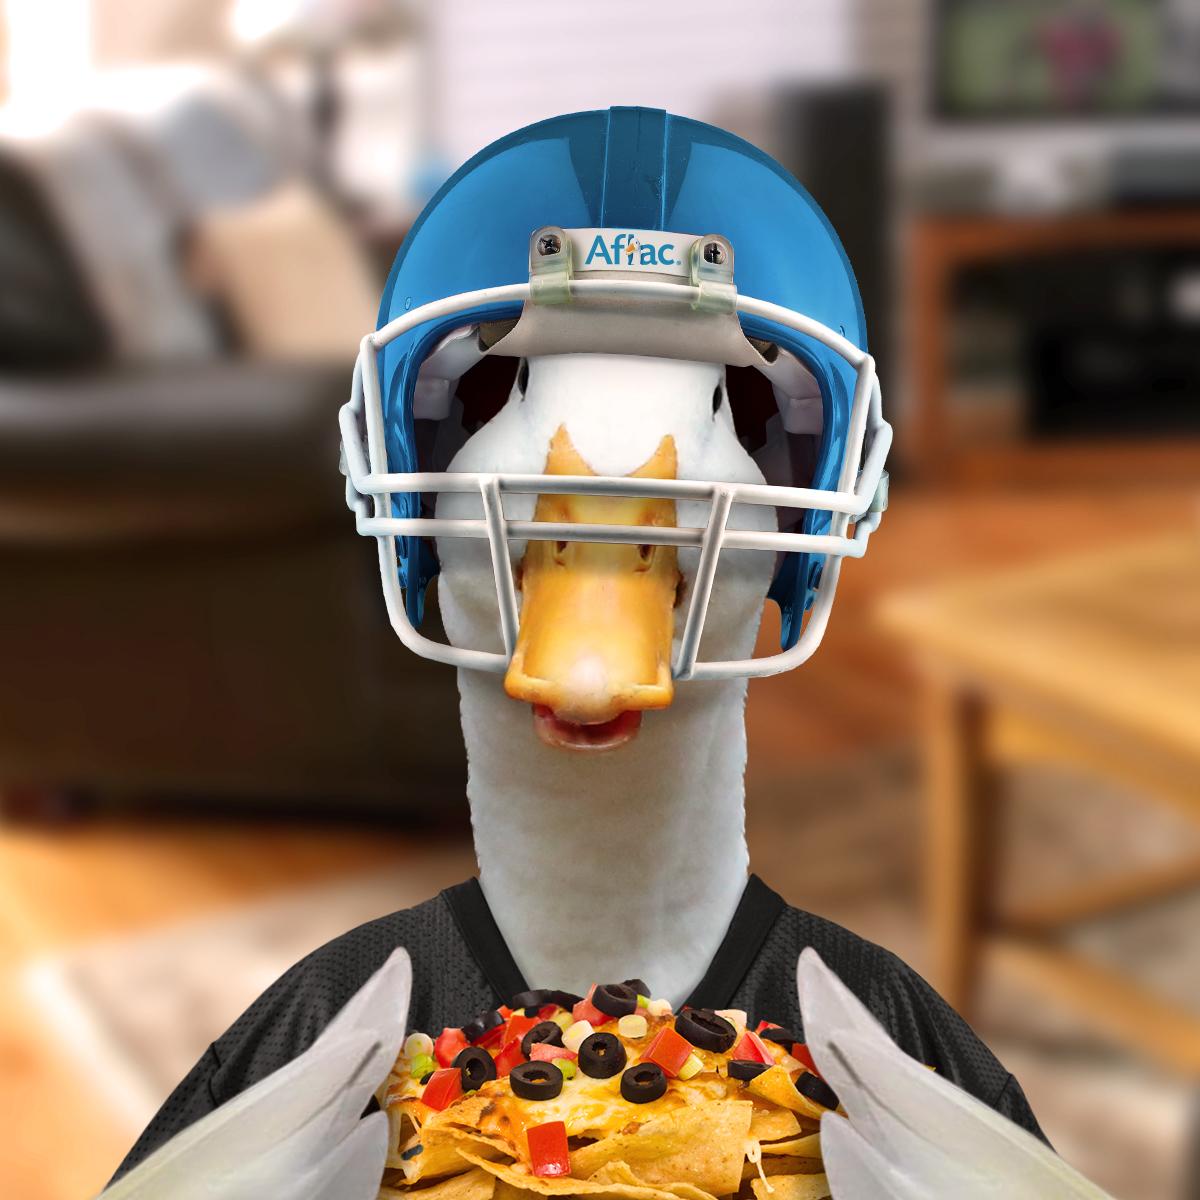 Aflac On Twitter Who S Got Two Wings A Shiny New Helmet And An Awesome Nacho Recipe This Duck Getonmylevel Ducklife Gameday Http T Co Xvrvq7p5v6